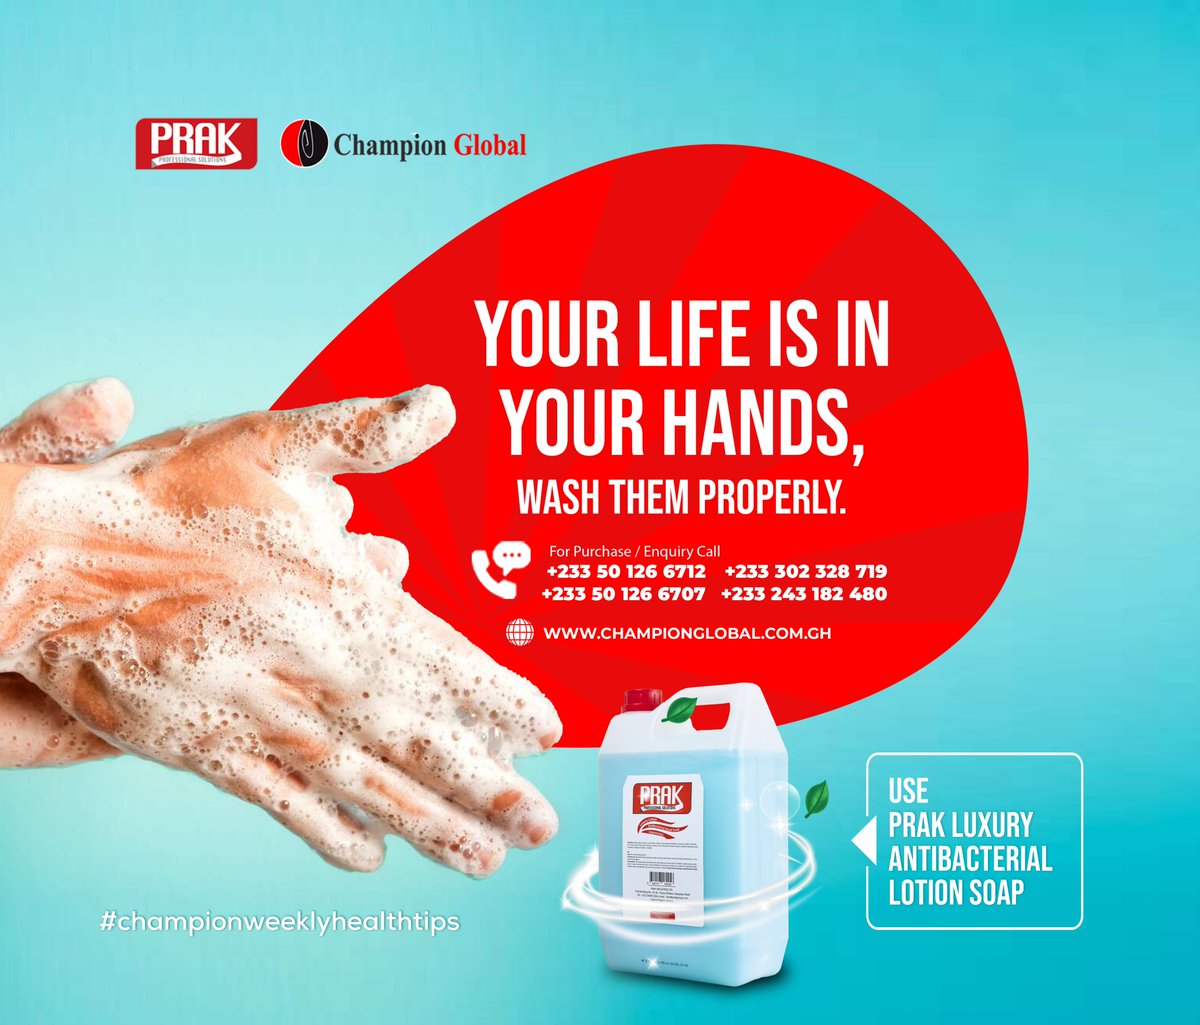 Your life is in your hands, wash them properly with PRAK LUXURY ANTIBACTERIAL LOTION SOAP

#handsoap
#killgerms
#healthtips
#ordernow